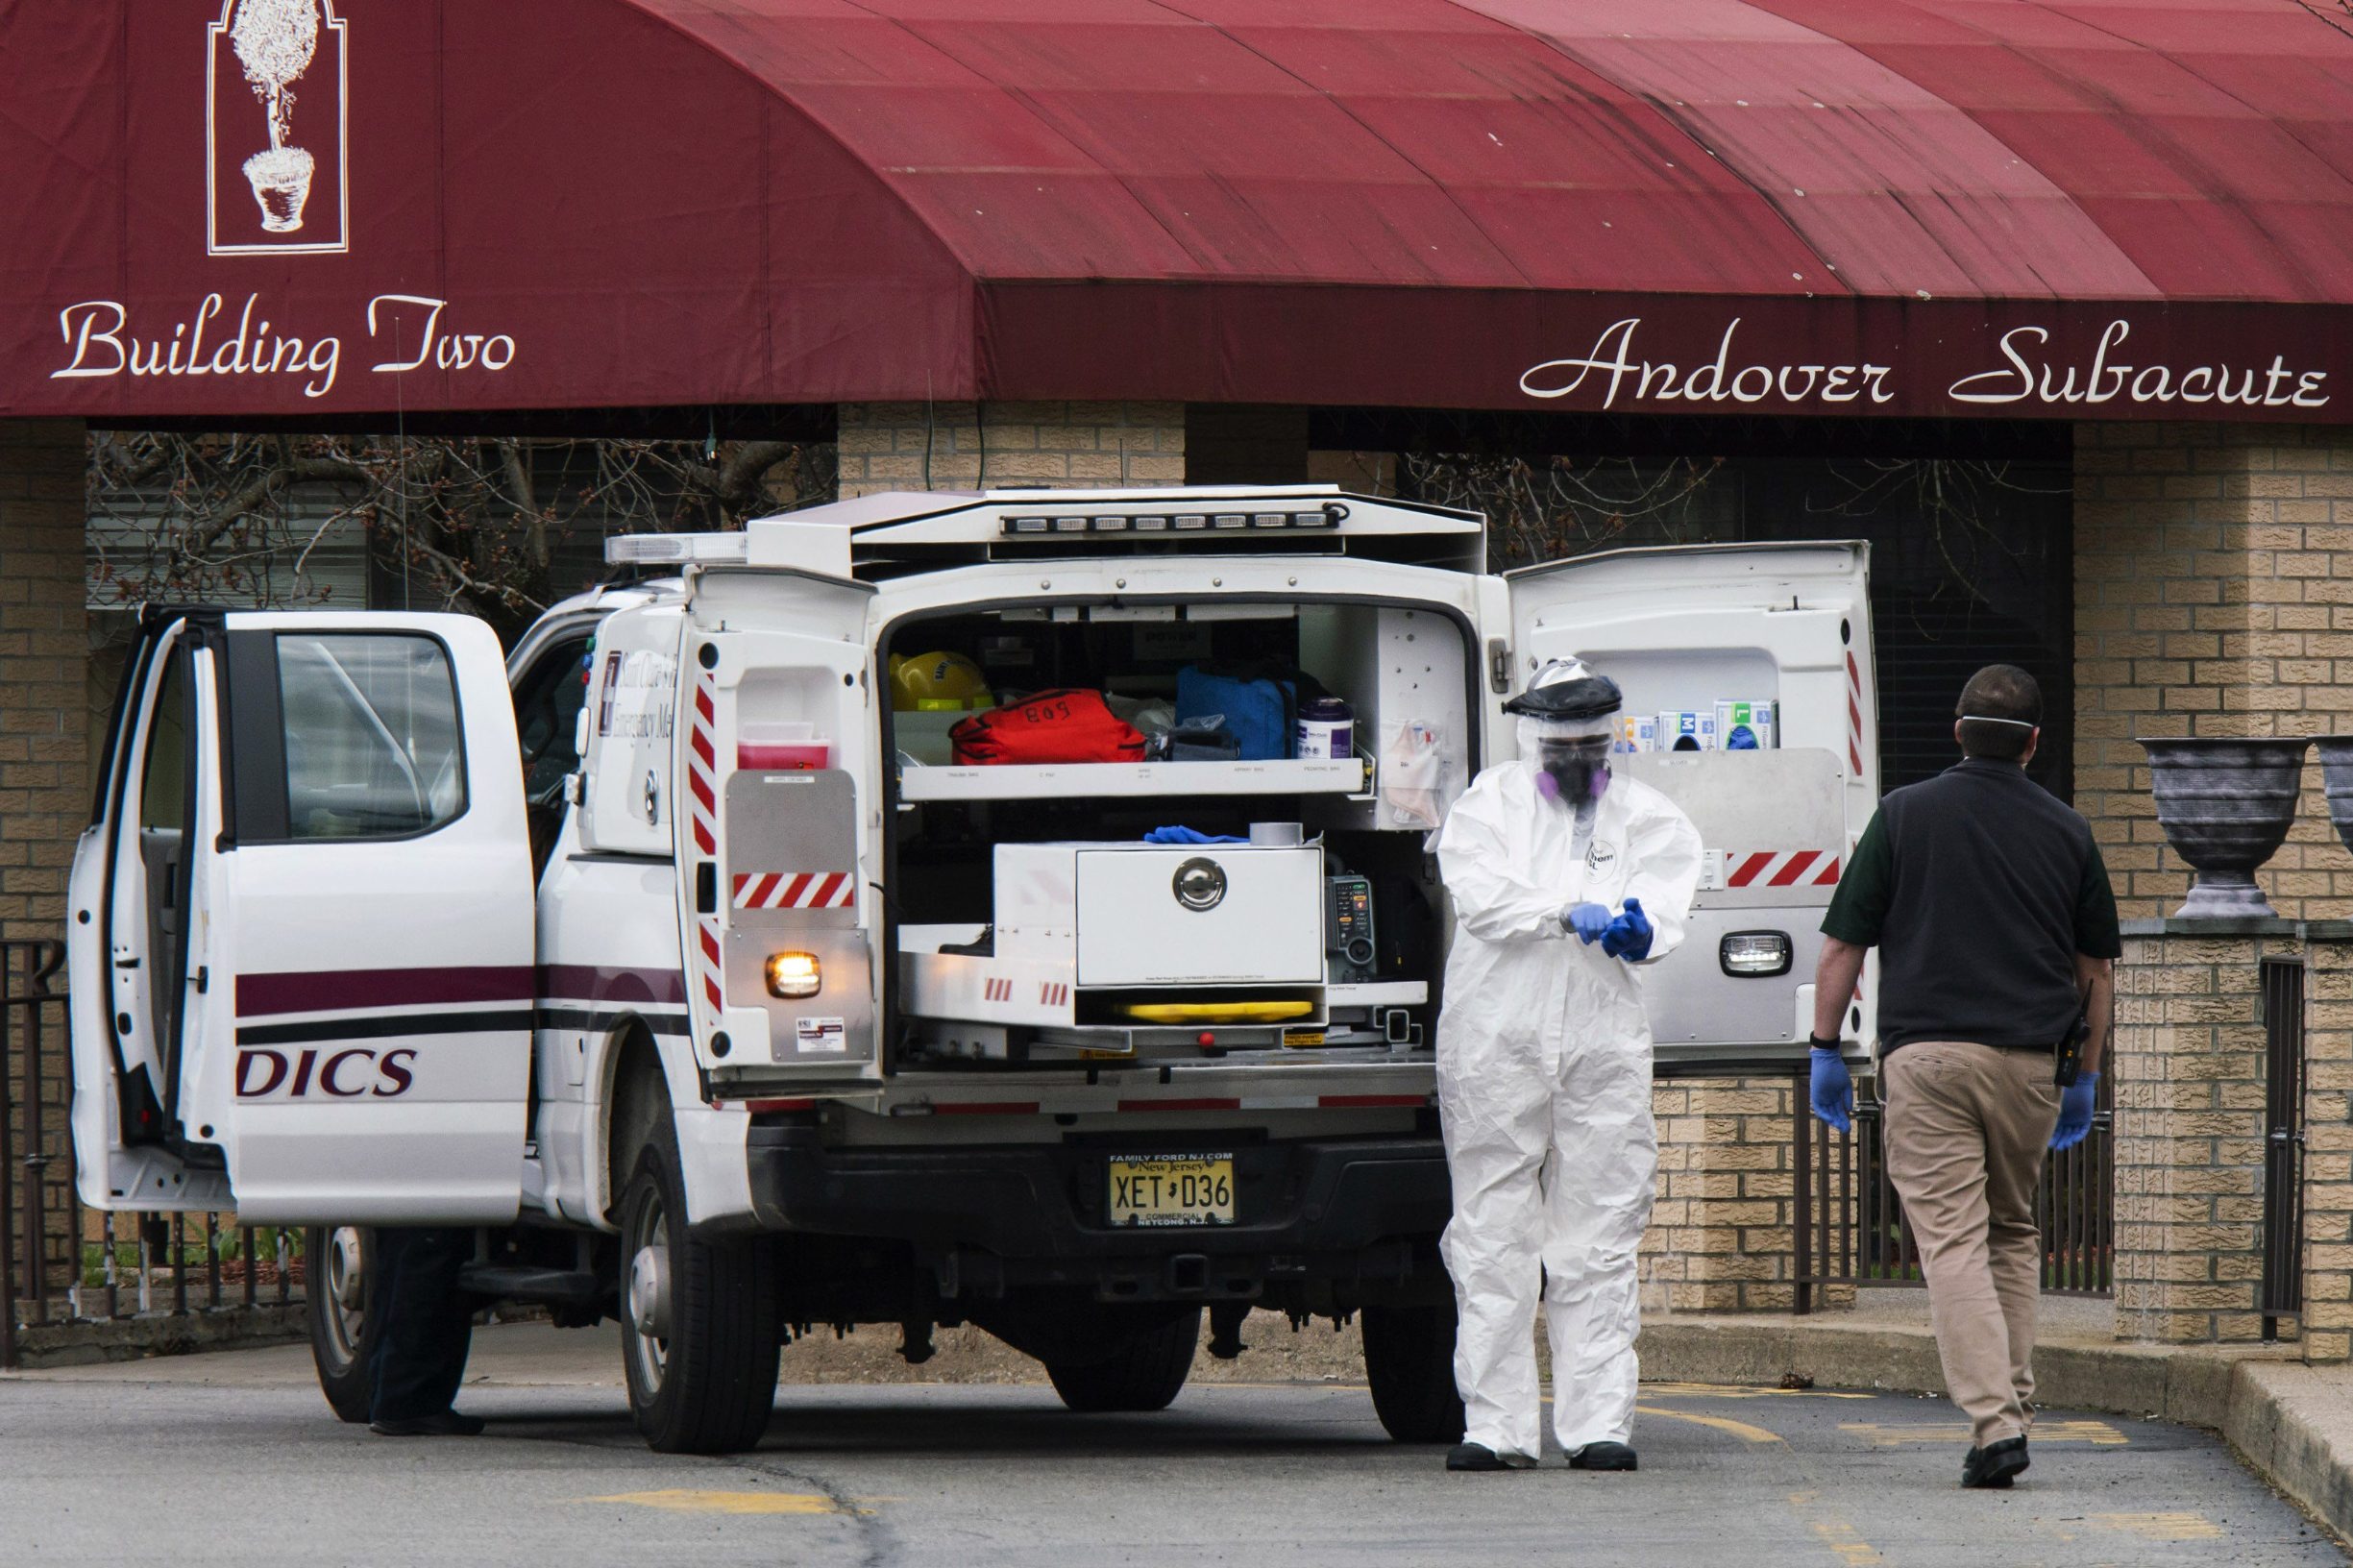 ANDOVER, NJ - APRIL 16: Medical workers put on masks and personal protective equipment (PPE) while preparing to transport a deceased body at Andover Subacute and Rehabilitation Center on April 16, 2020 in Andover, New Jersey. After an anonymous tip to police, 17 people were found dead at the long-term care facility, including two nurses, where at least 76 patients and 41 staff members have tested positive for COVID-19.   Eduardo Munoz Alvarez/Getty Images/AFP
== FOR NEWSPAPERS, INTERNET, TELCOS & TELEVISION USE ONLY ==